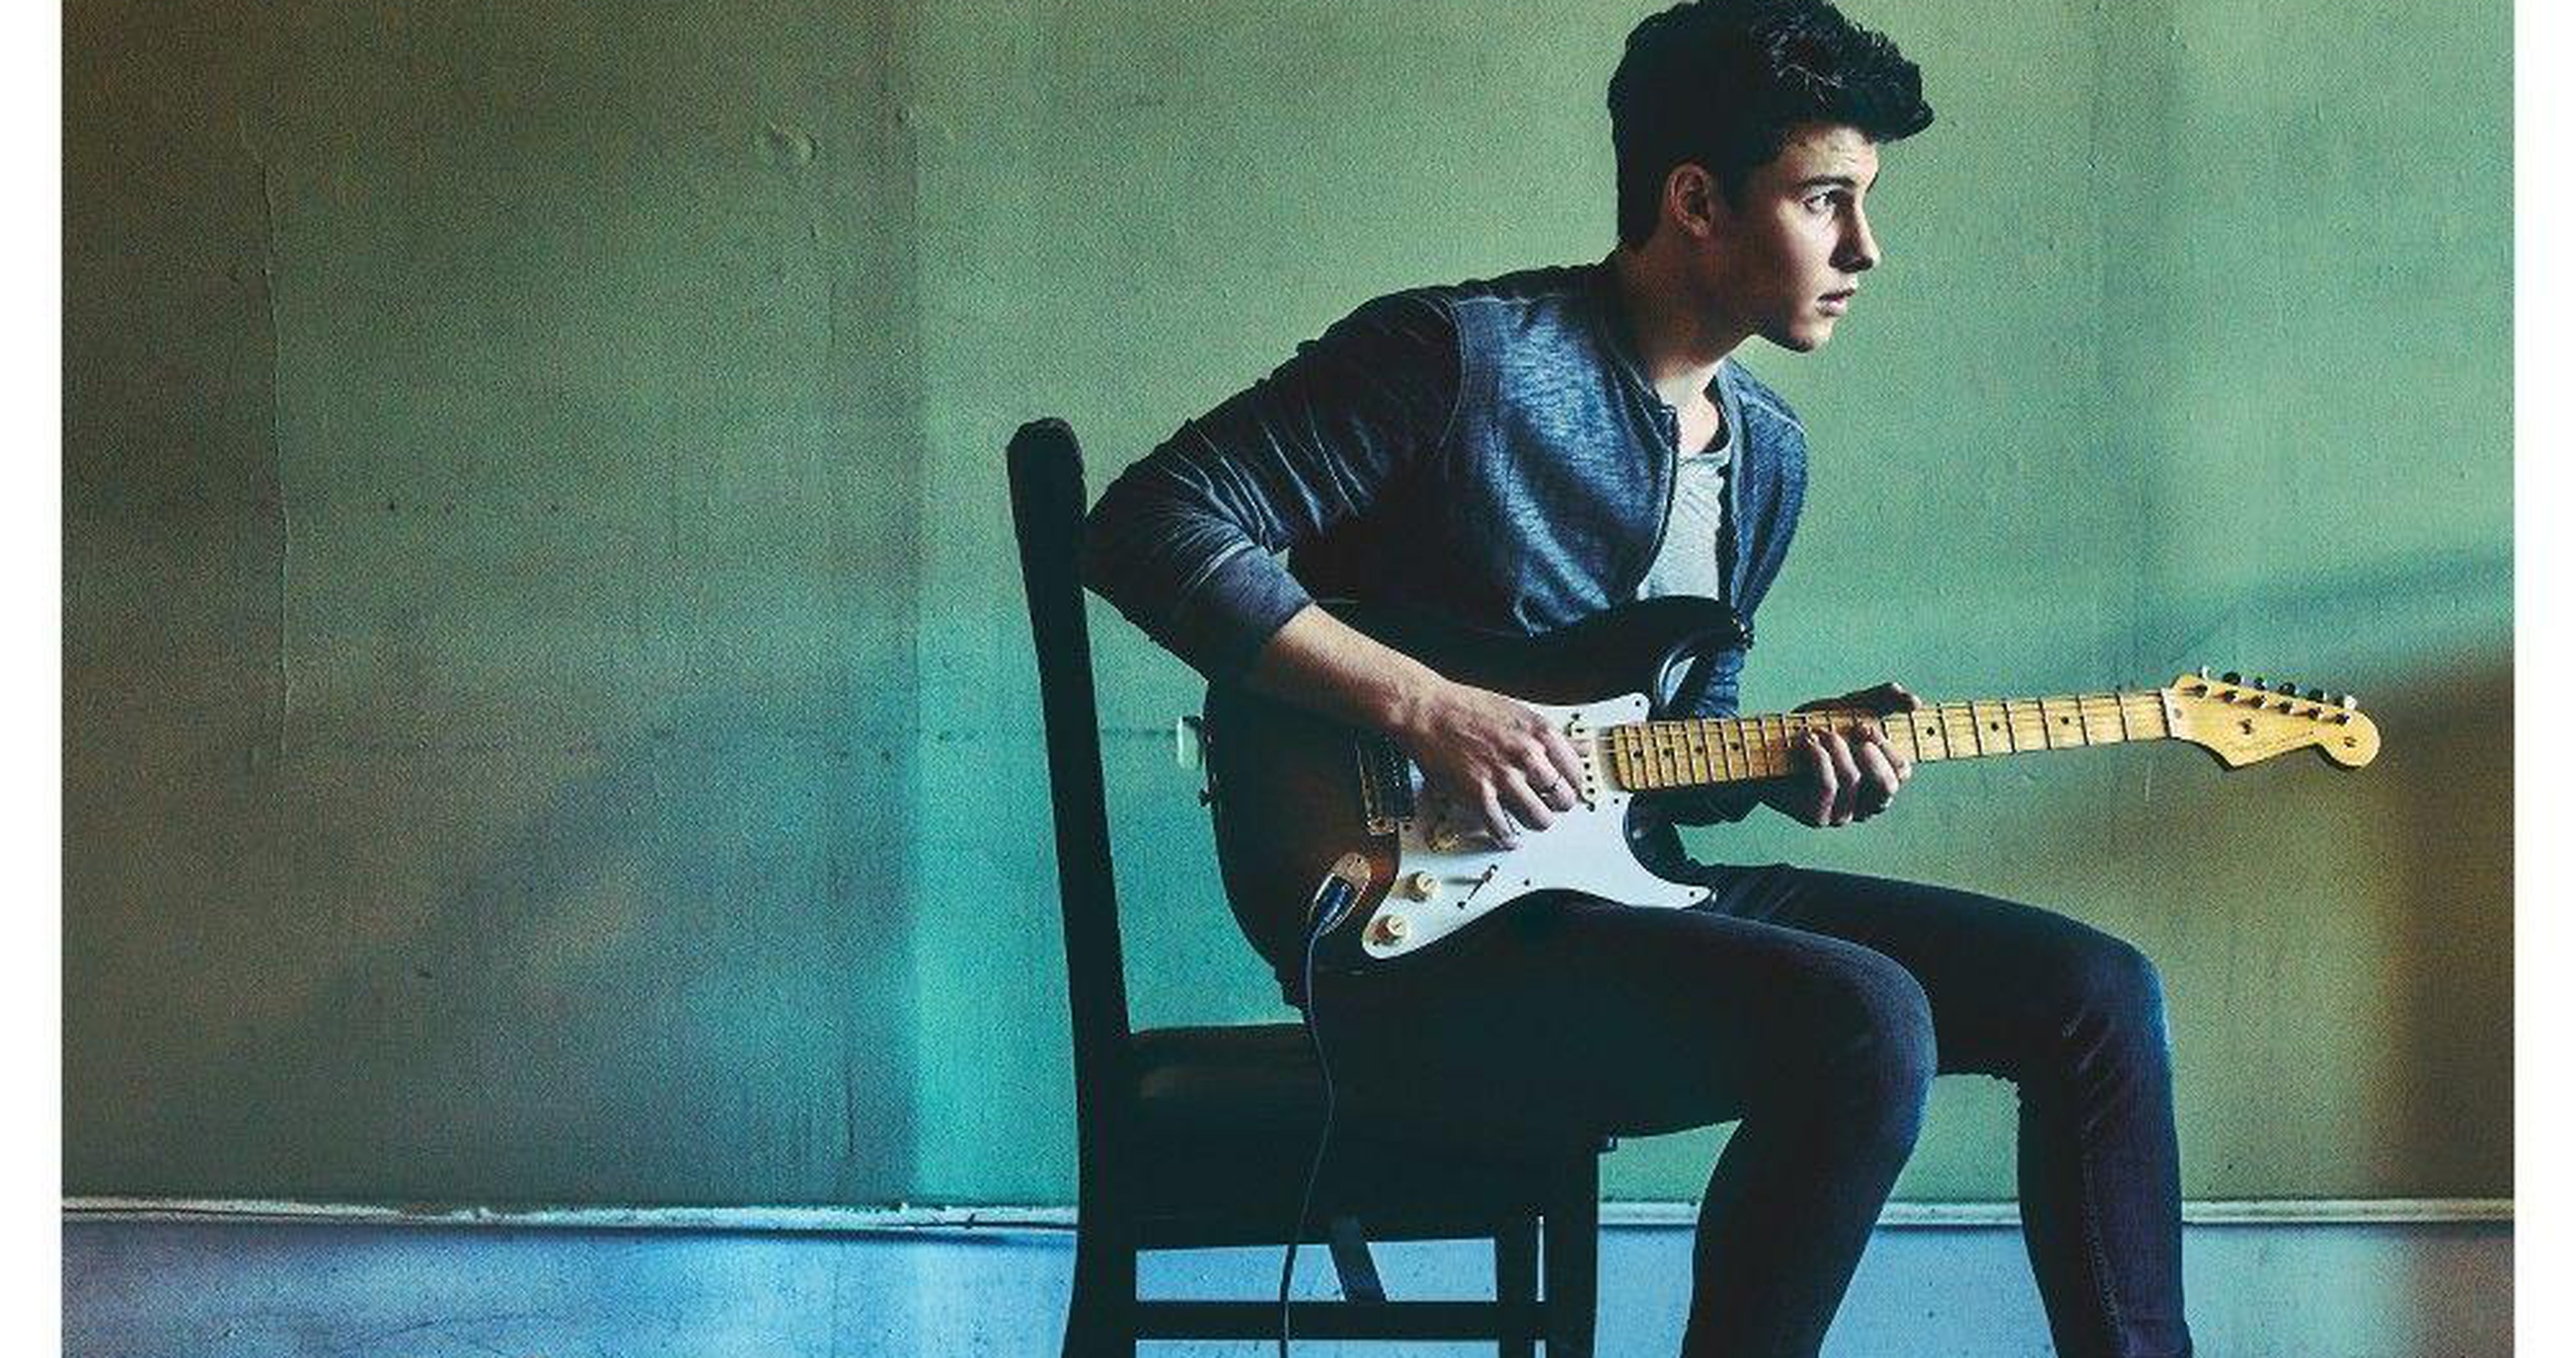 Download Shawn Mendes, Illuminate, Song for DCI 4K Wallpaper, Music